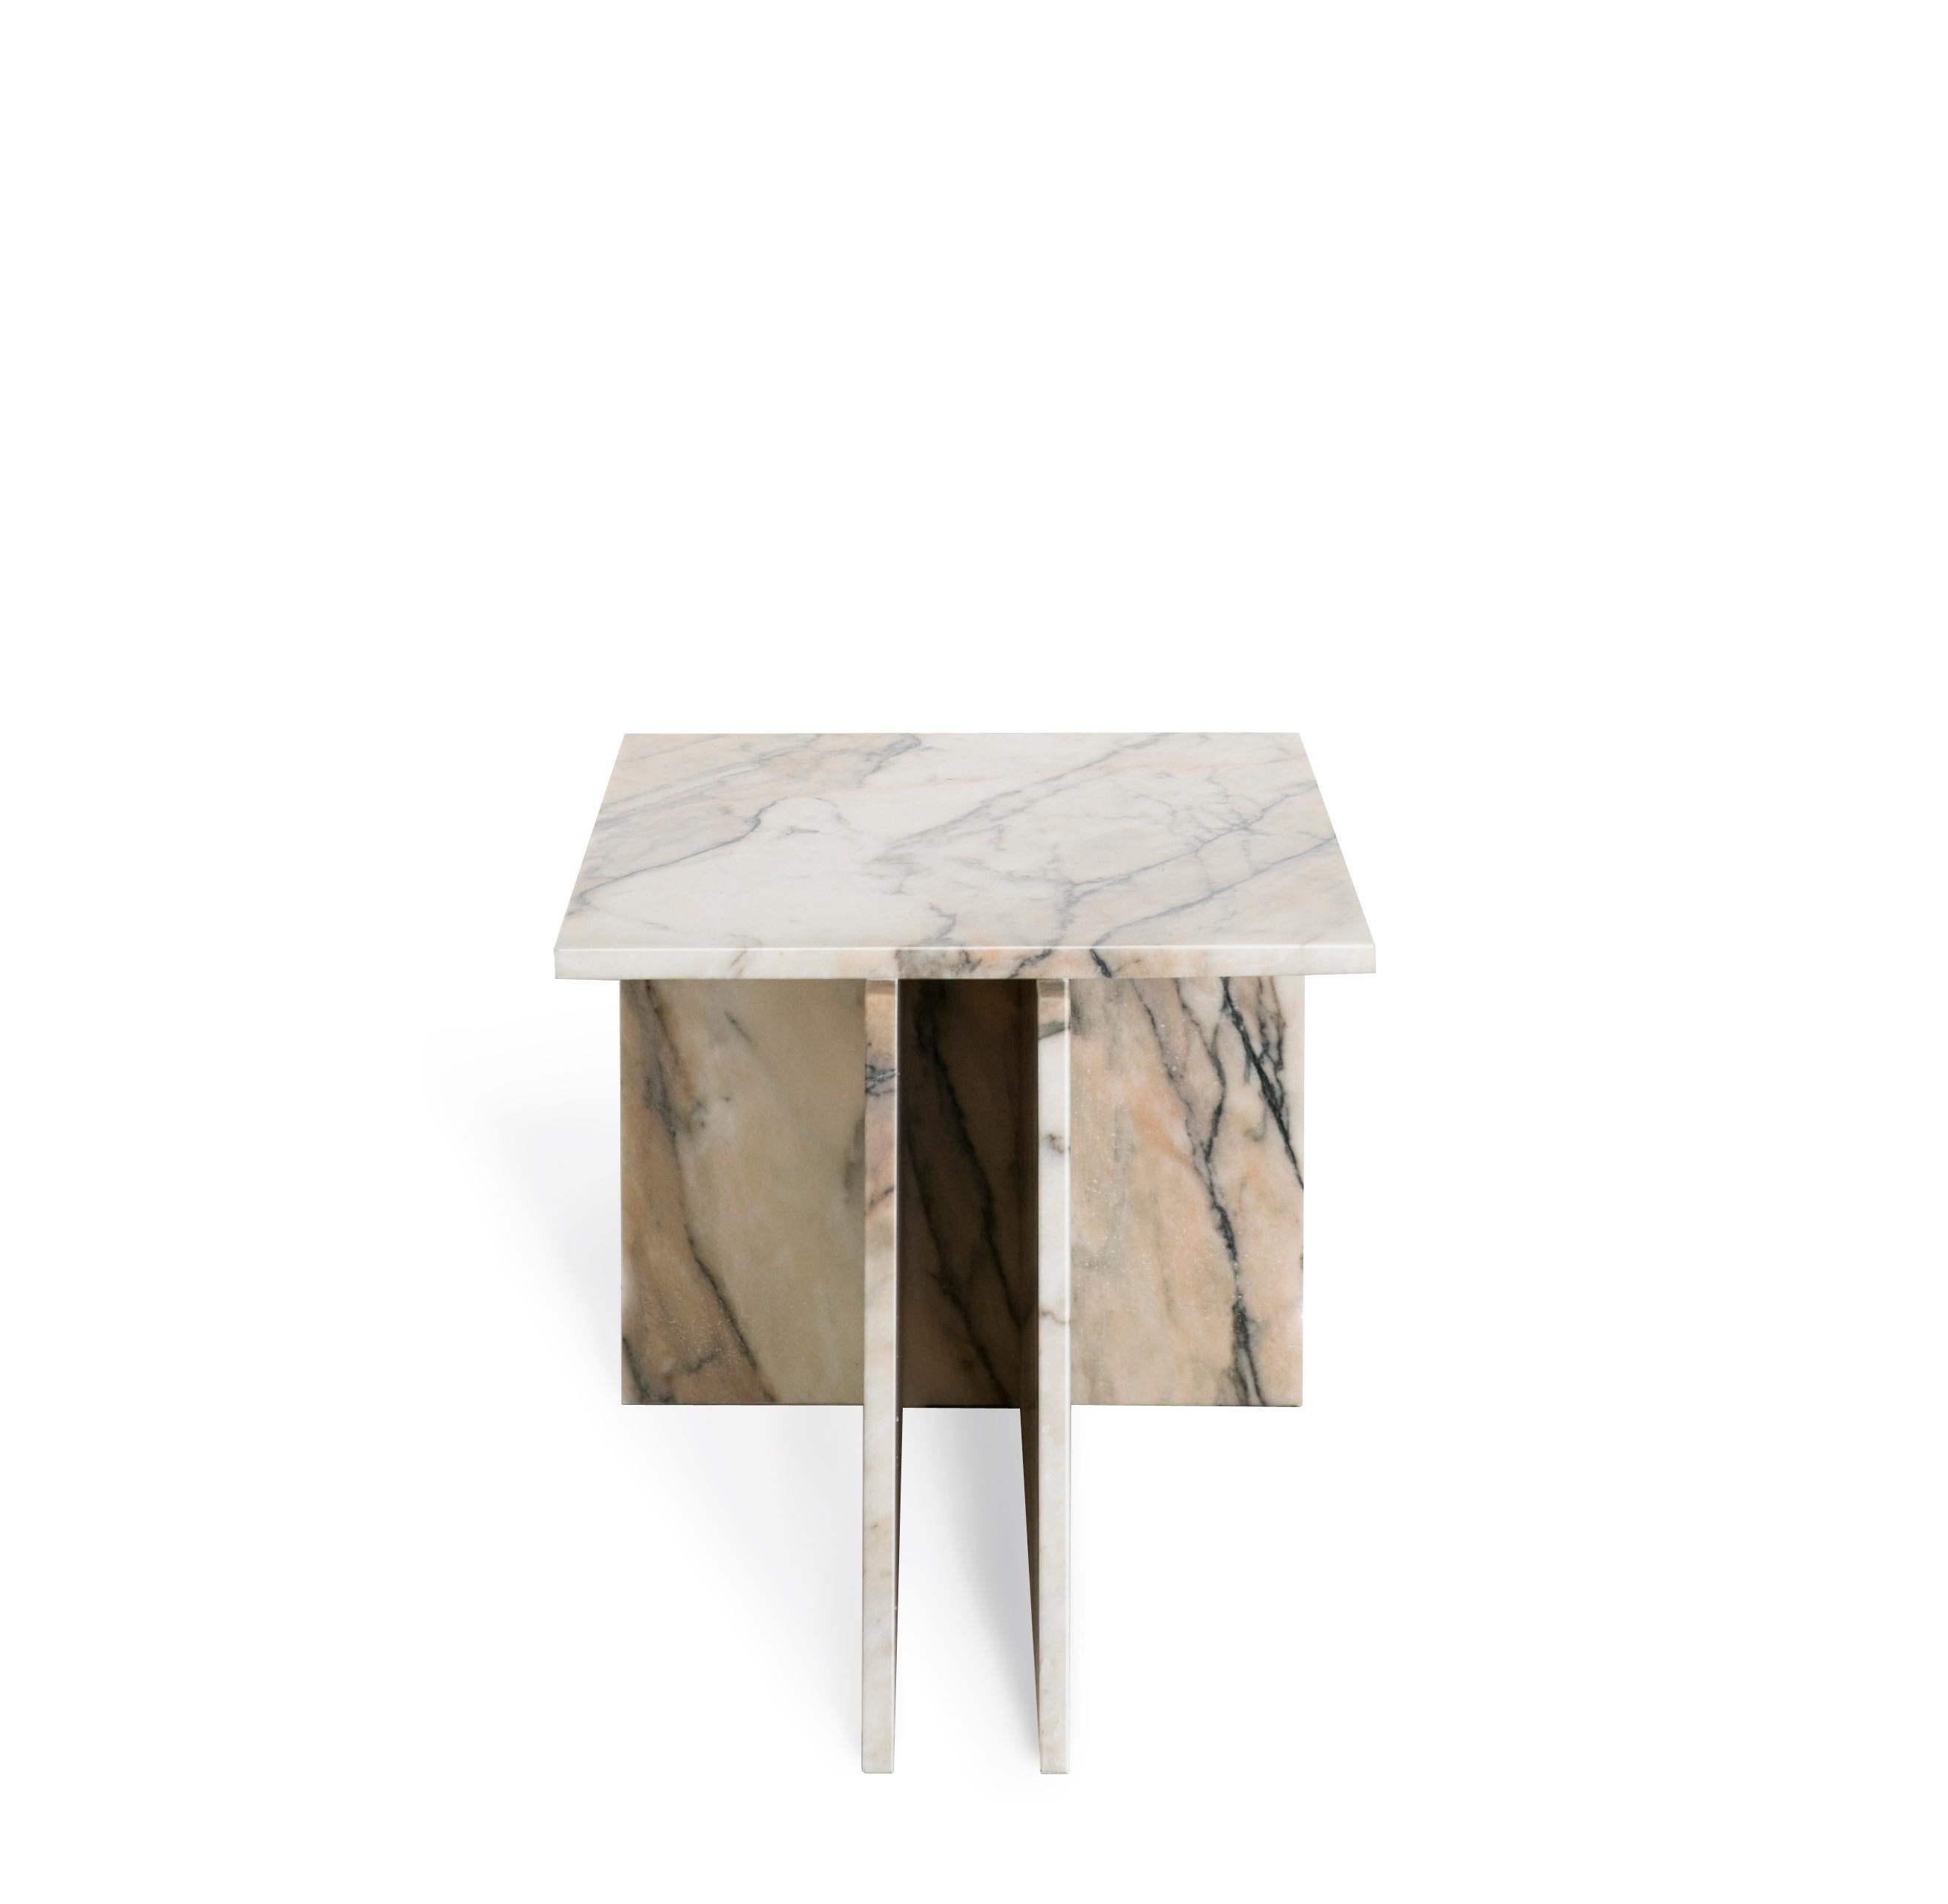 The 'Thé' table is a versatile table that can be used as a side table or coffee table.

Two vertical planes join to another plane, composing a T-shaped base for the top of the table. Produced in marble, it can be used in pairs (require 02 items to